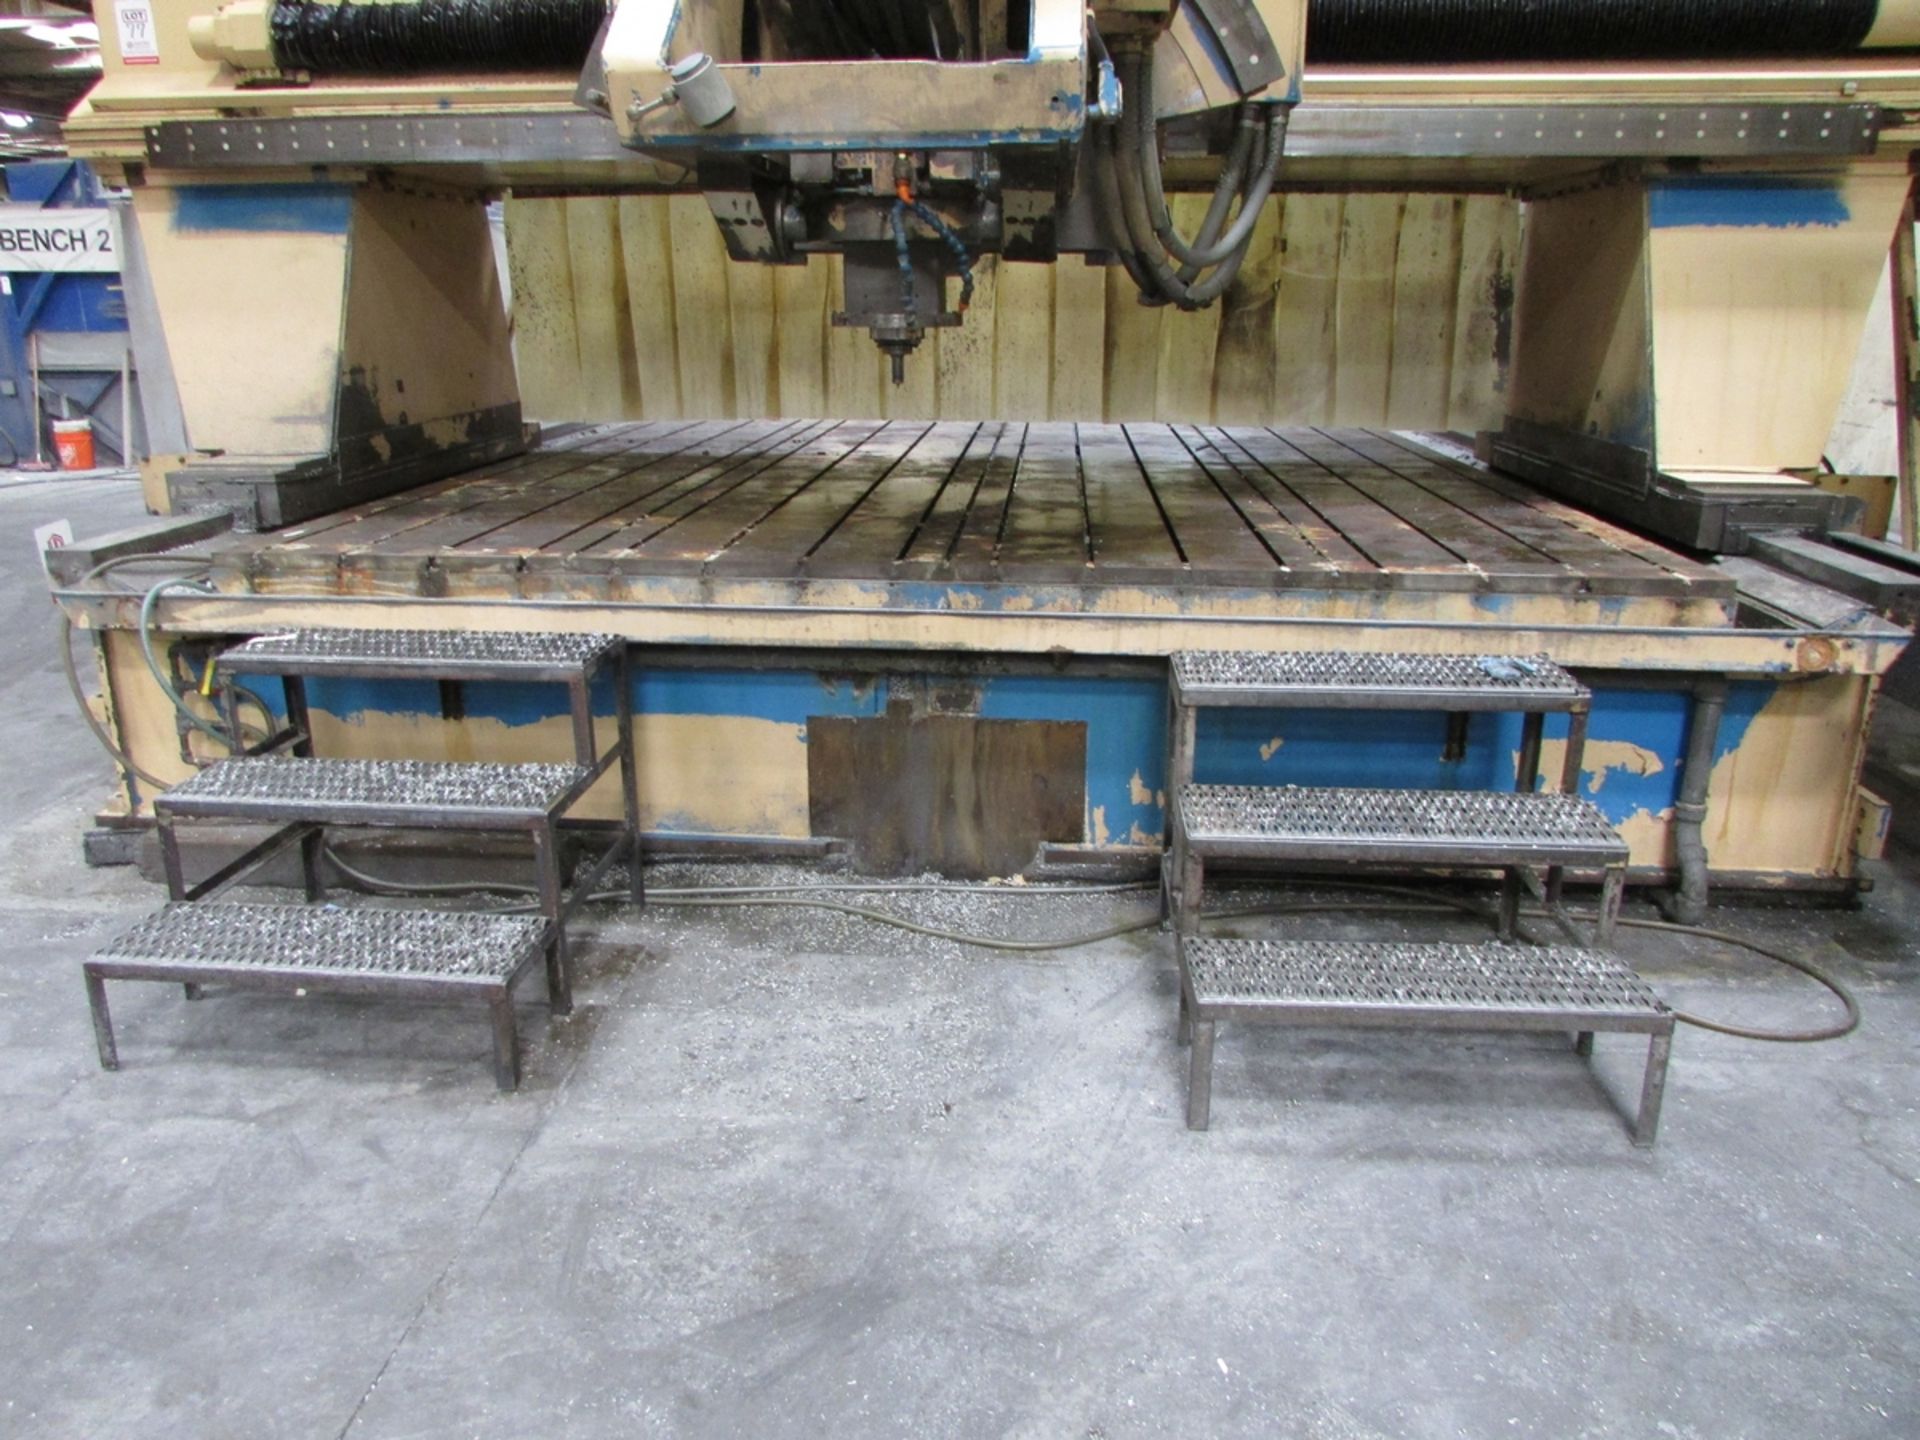 T-SLOTTED GANTRY MILL TABLE, 120' X 160", 125' BEDWAY LENGTH - Image 16 of 18